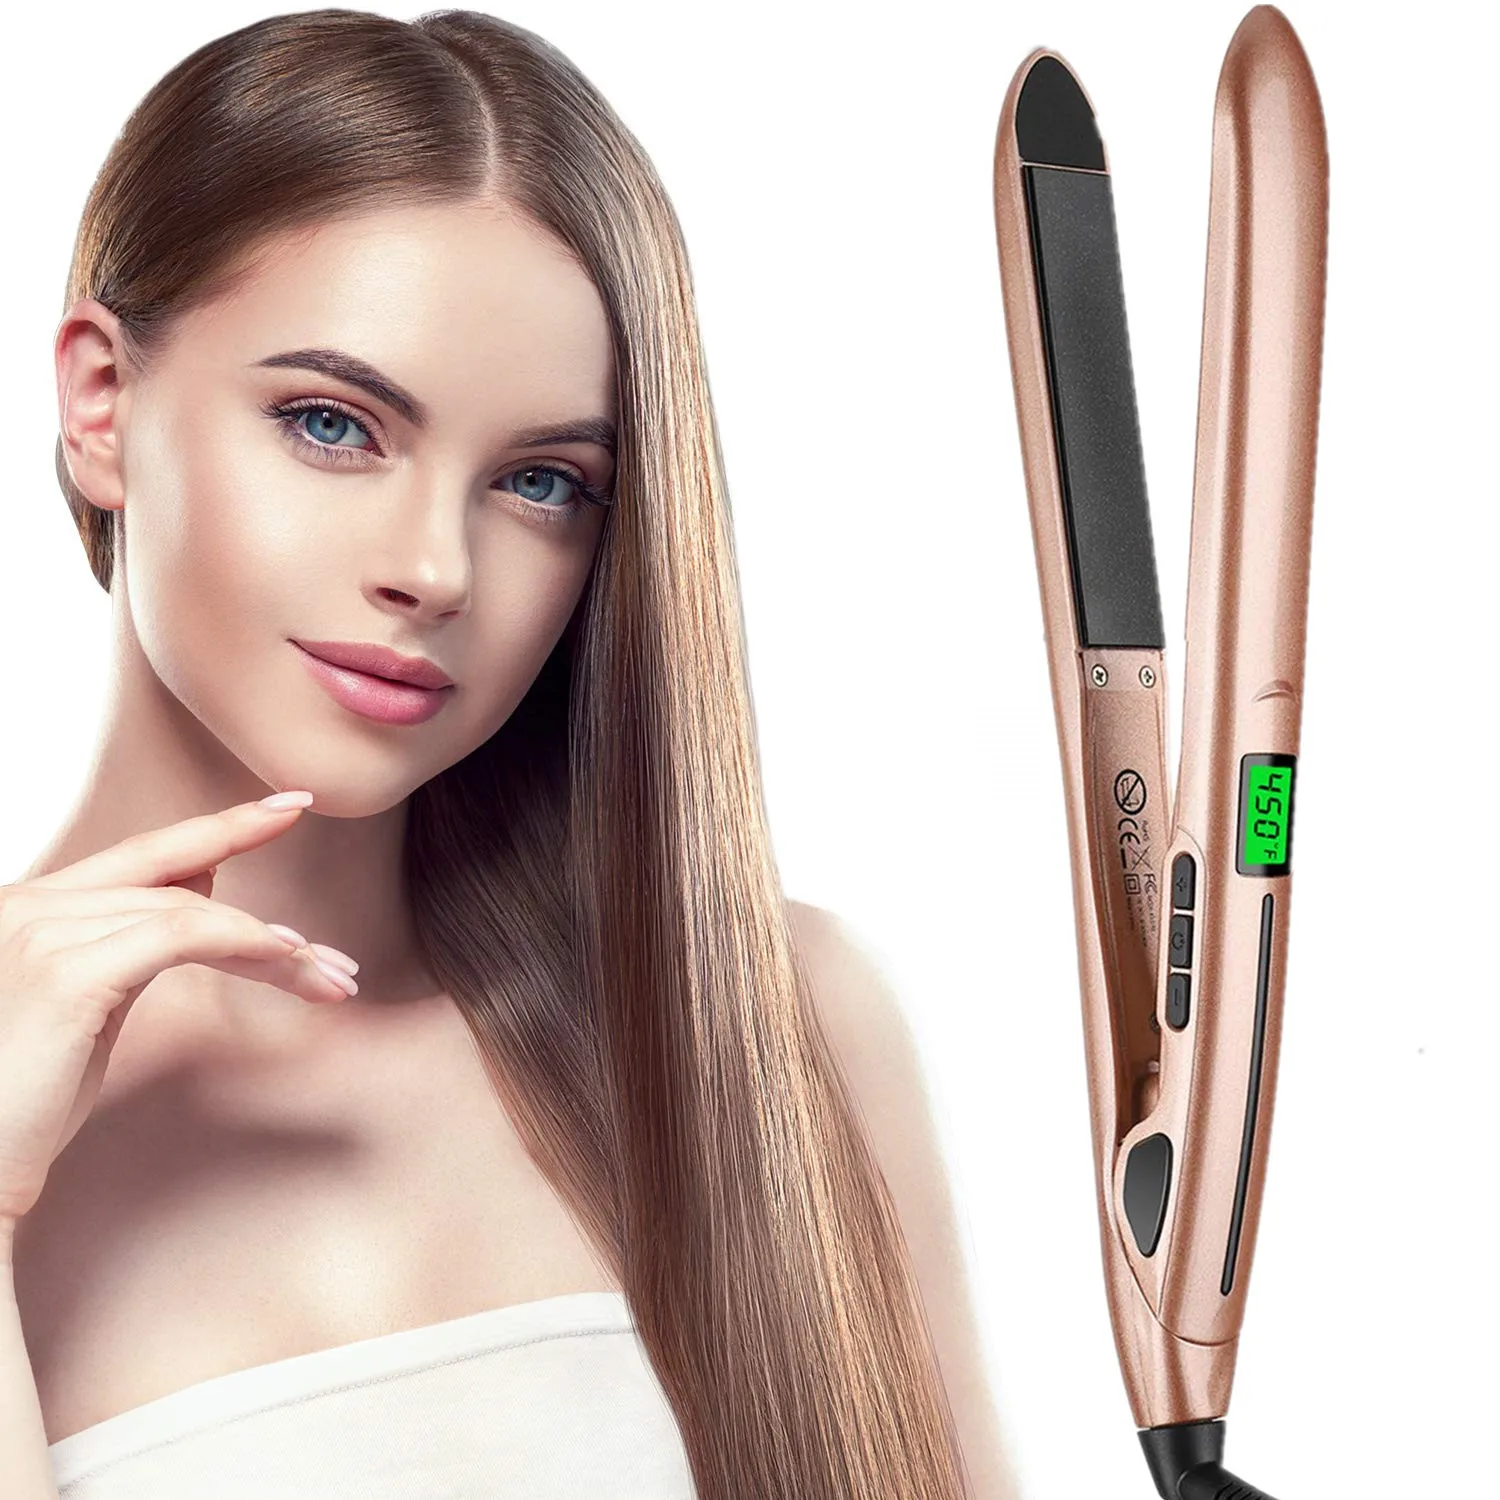 Professional Flat Iron Hair Straightener With Digital Lcd Display Heating Curling Straighteners Straightening Styling Hair Plate